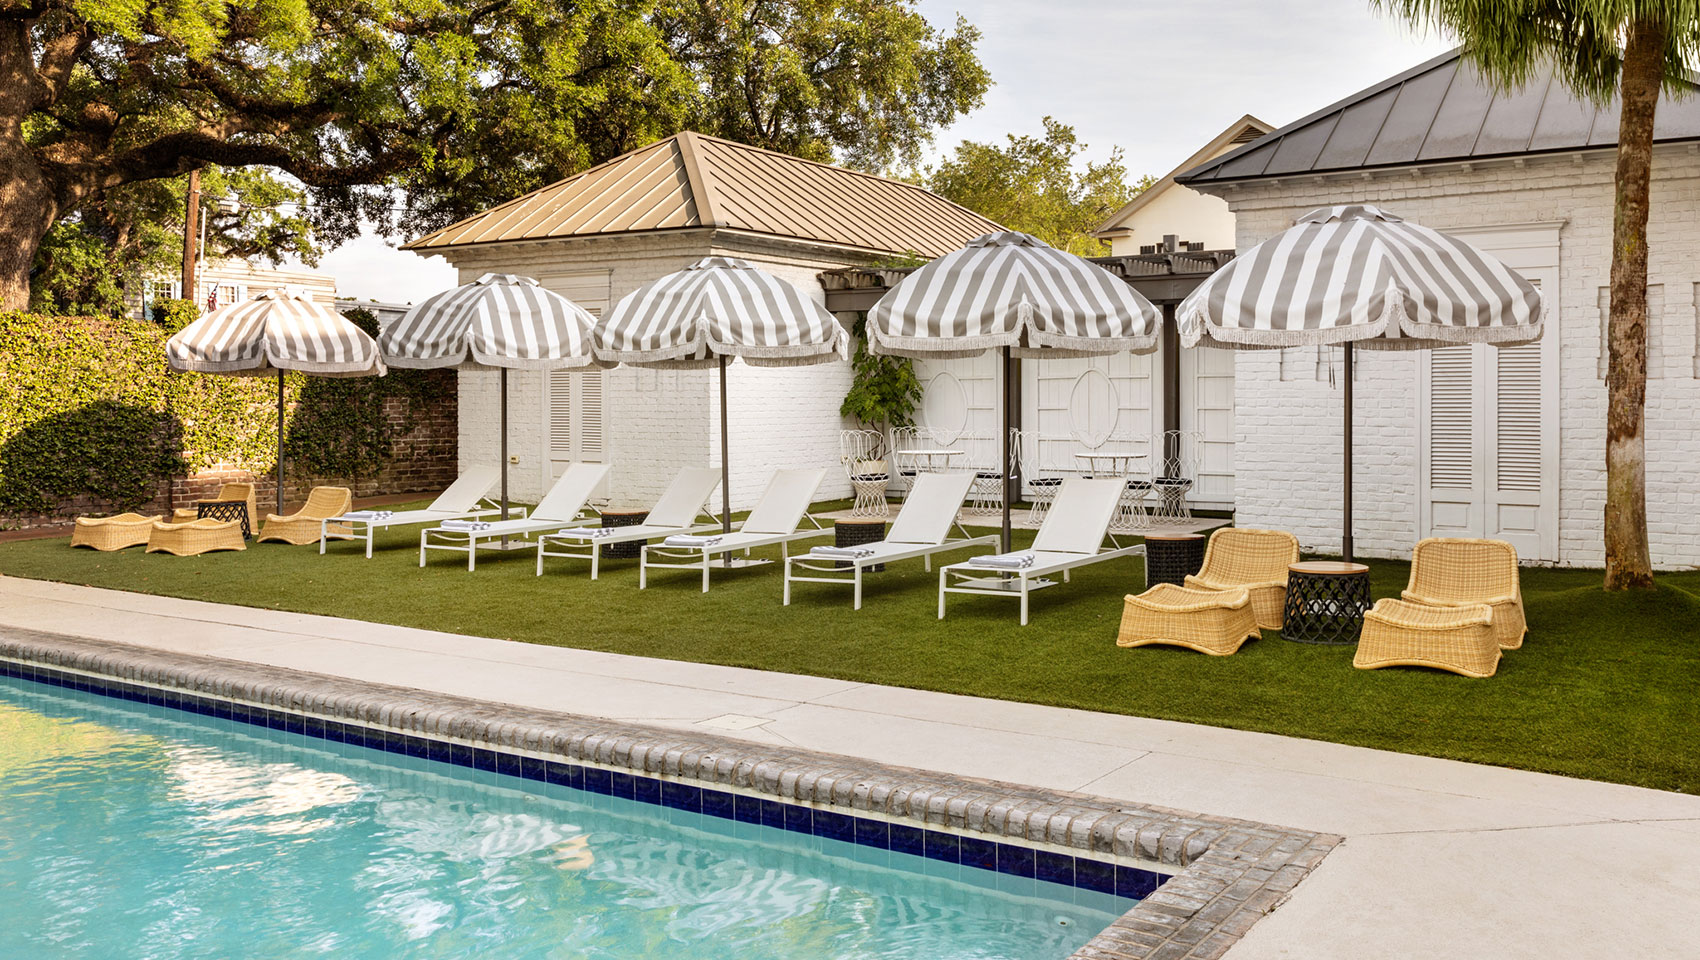 The Kimpton Brice Hotel pool with lounge chairs and umbrellas